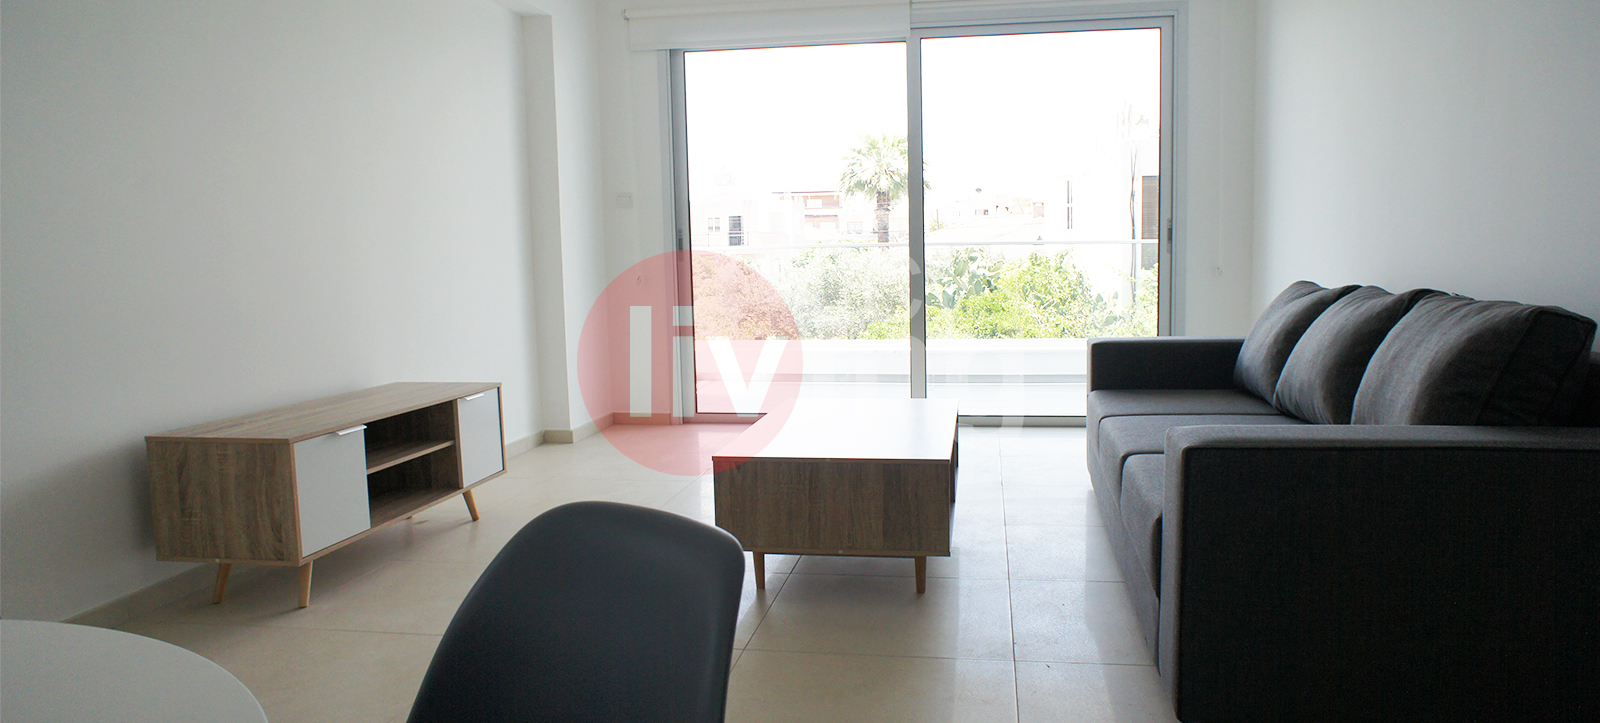 New 1 Bedroom Fully Furnished Flat To Rent In Engomi, Nicosia